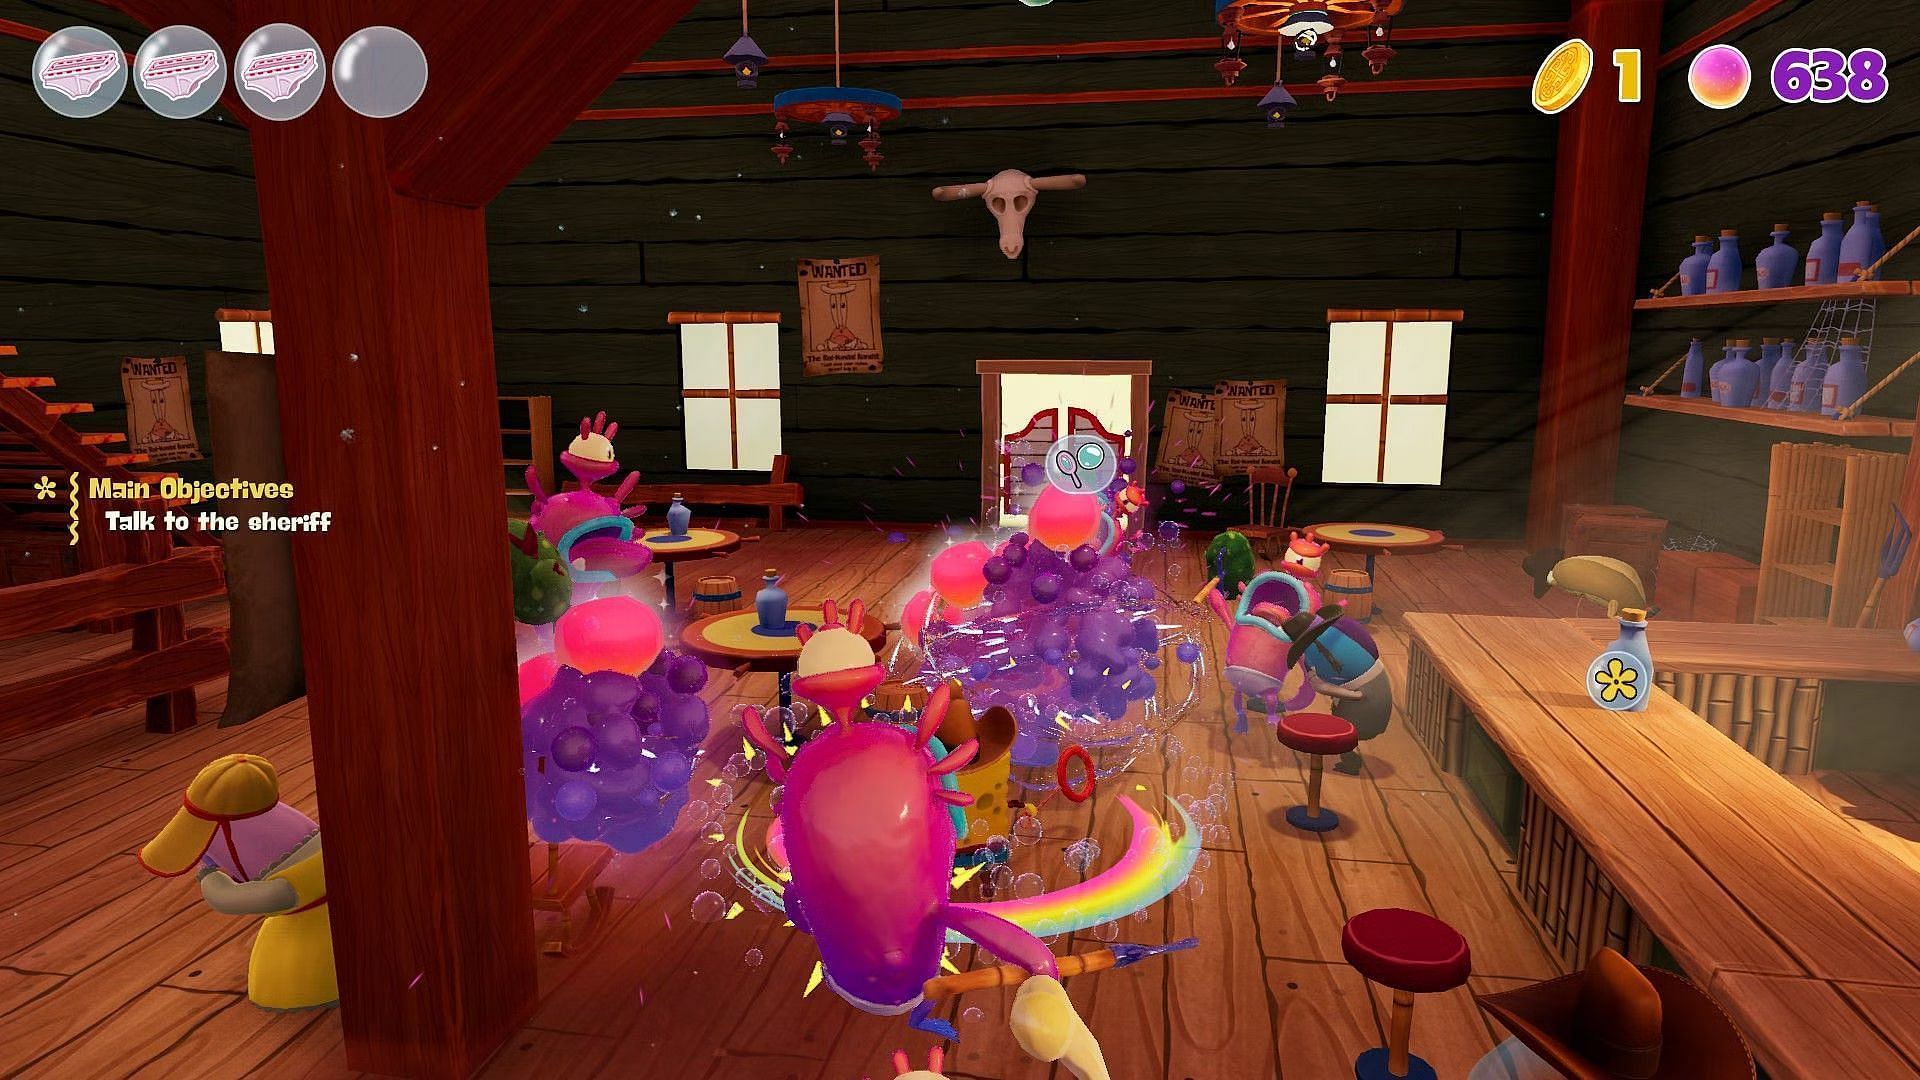 Brawl it out with the cosmic jelly baddies (Screenshot from SpongeBob SquarePants: The Cosmic Shake)